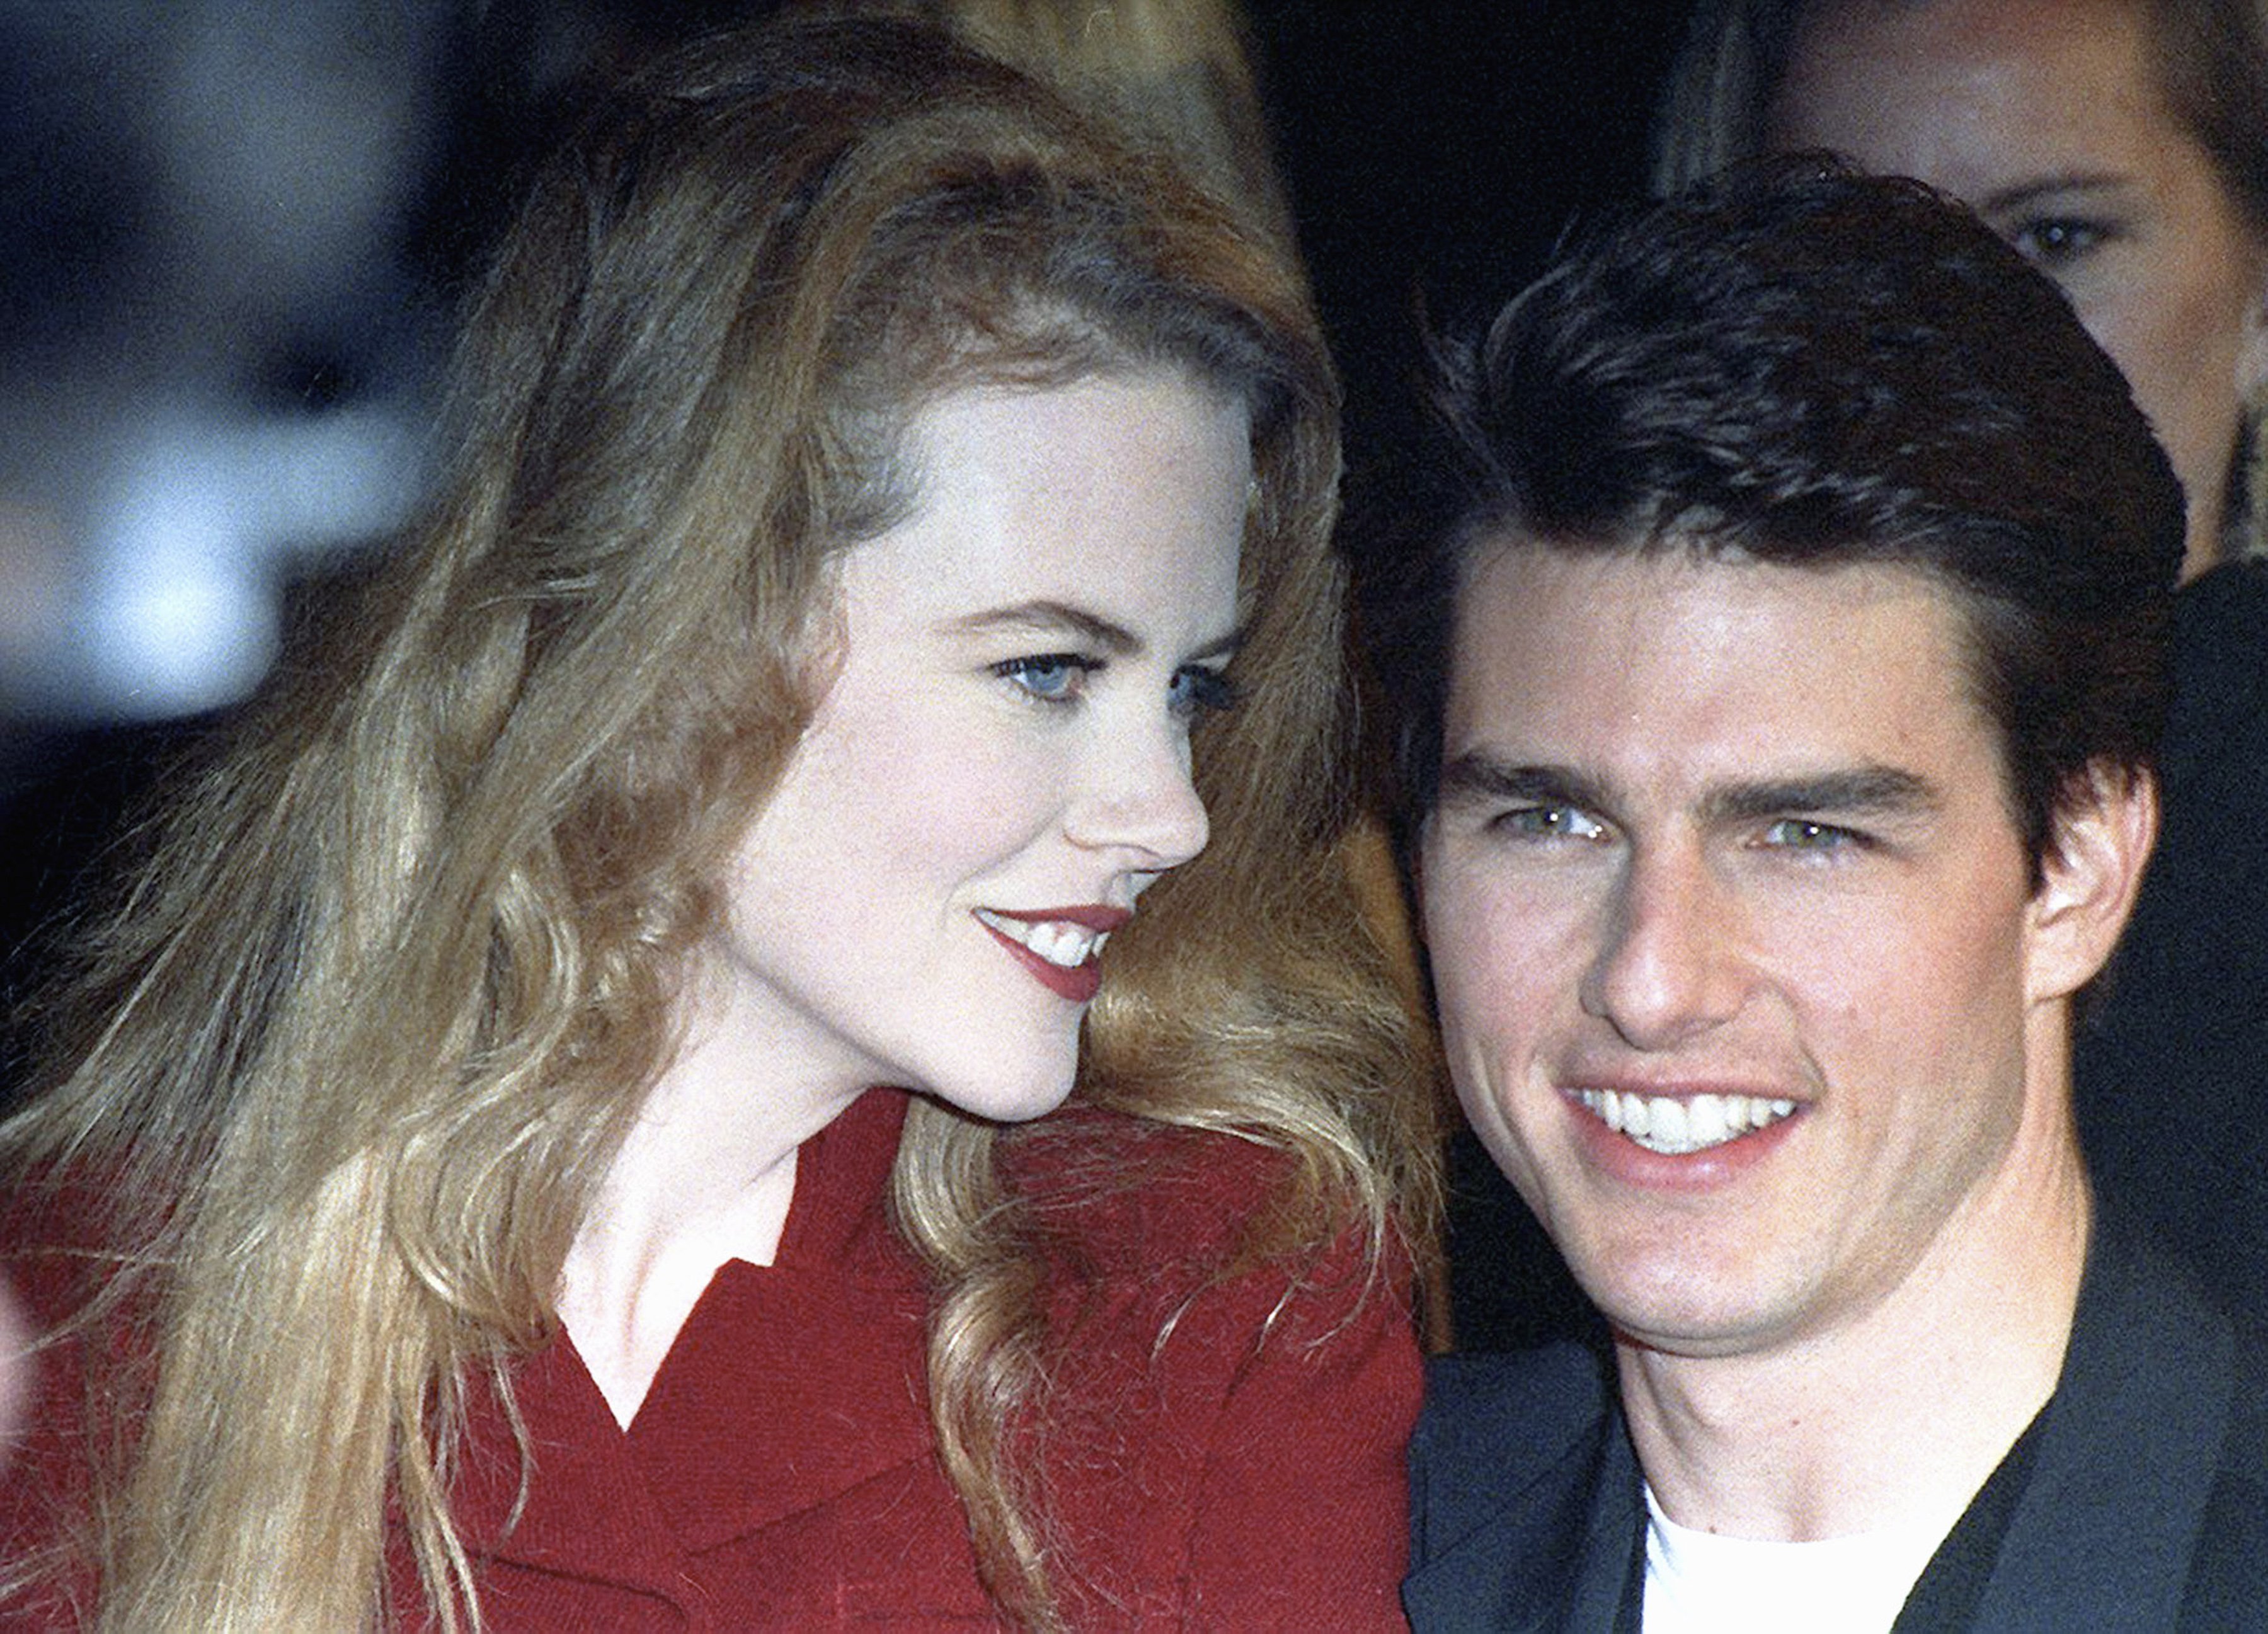 Nicole Kidman and Tom Cruise at the 'A Few Good Men' Westwood Premiere at Mann Village Theatre in Westwood, California. | Photo: Getty Images